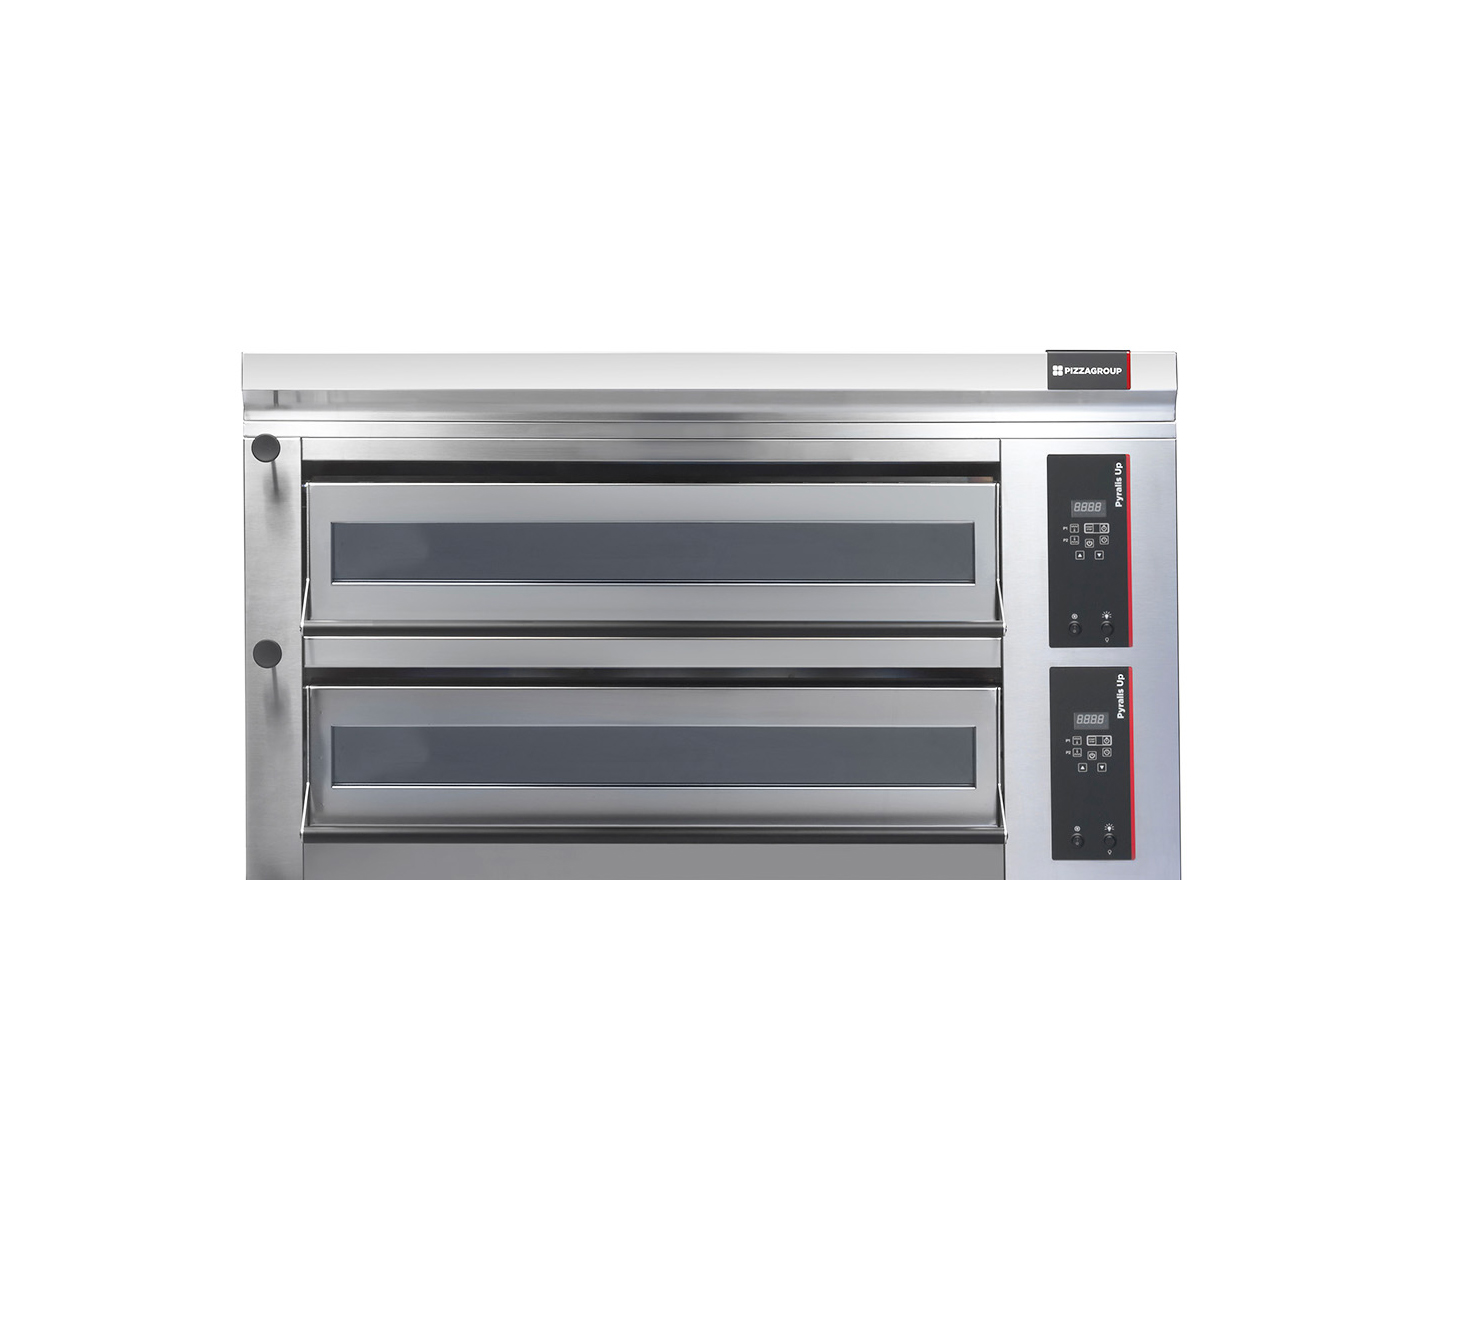 PIZZAGROUP Pyralis Up PY-UP D12 Double Deck Electric Pizza Oven